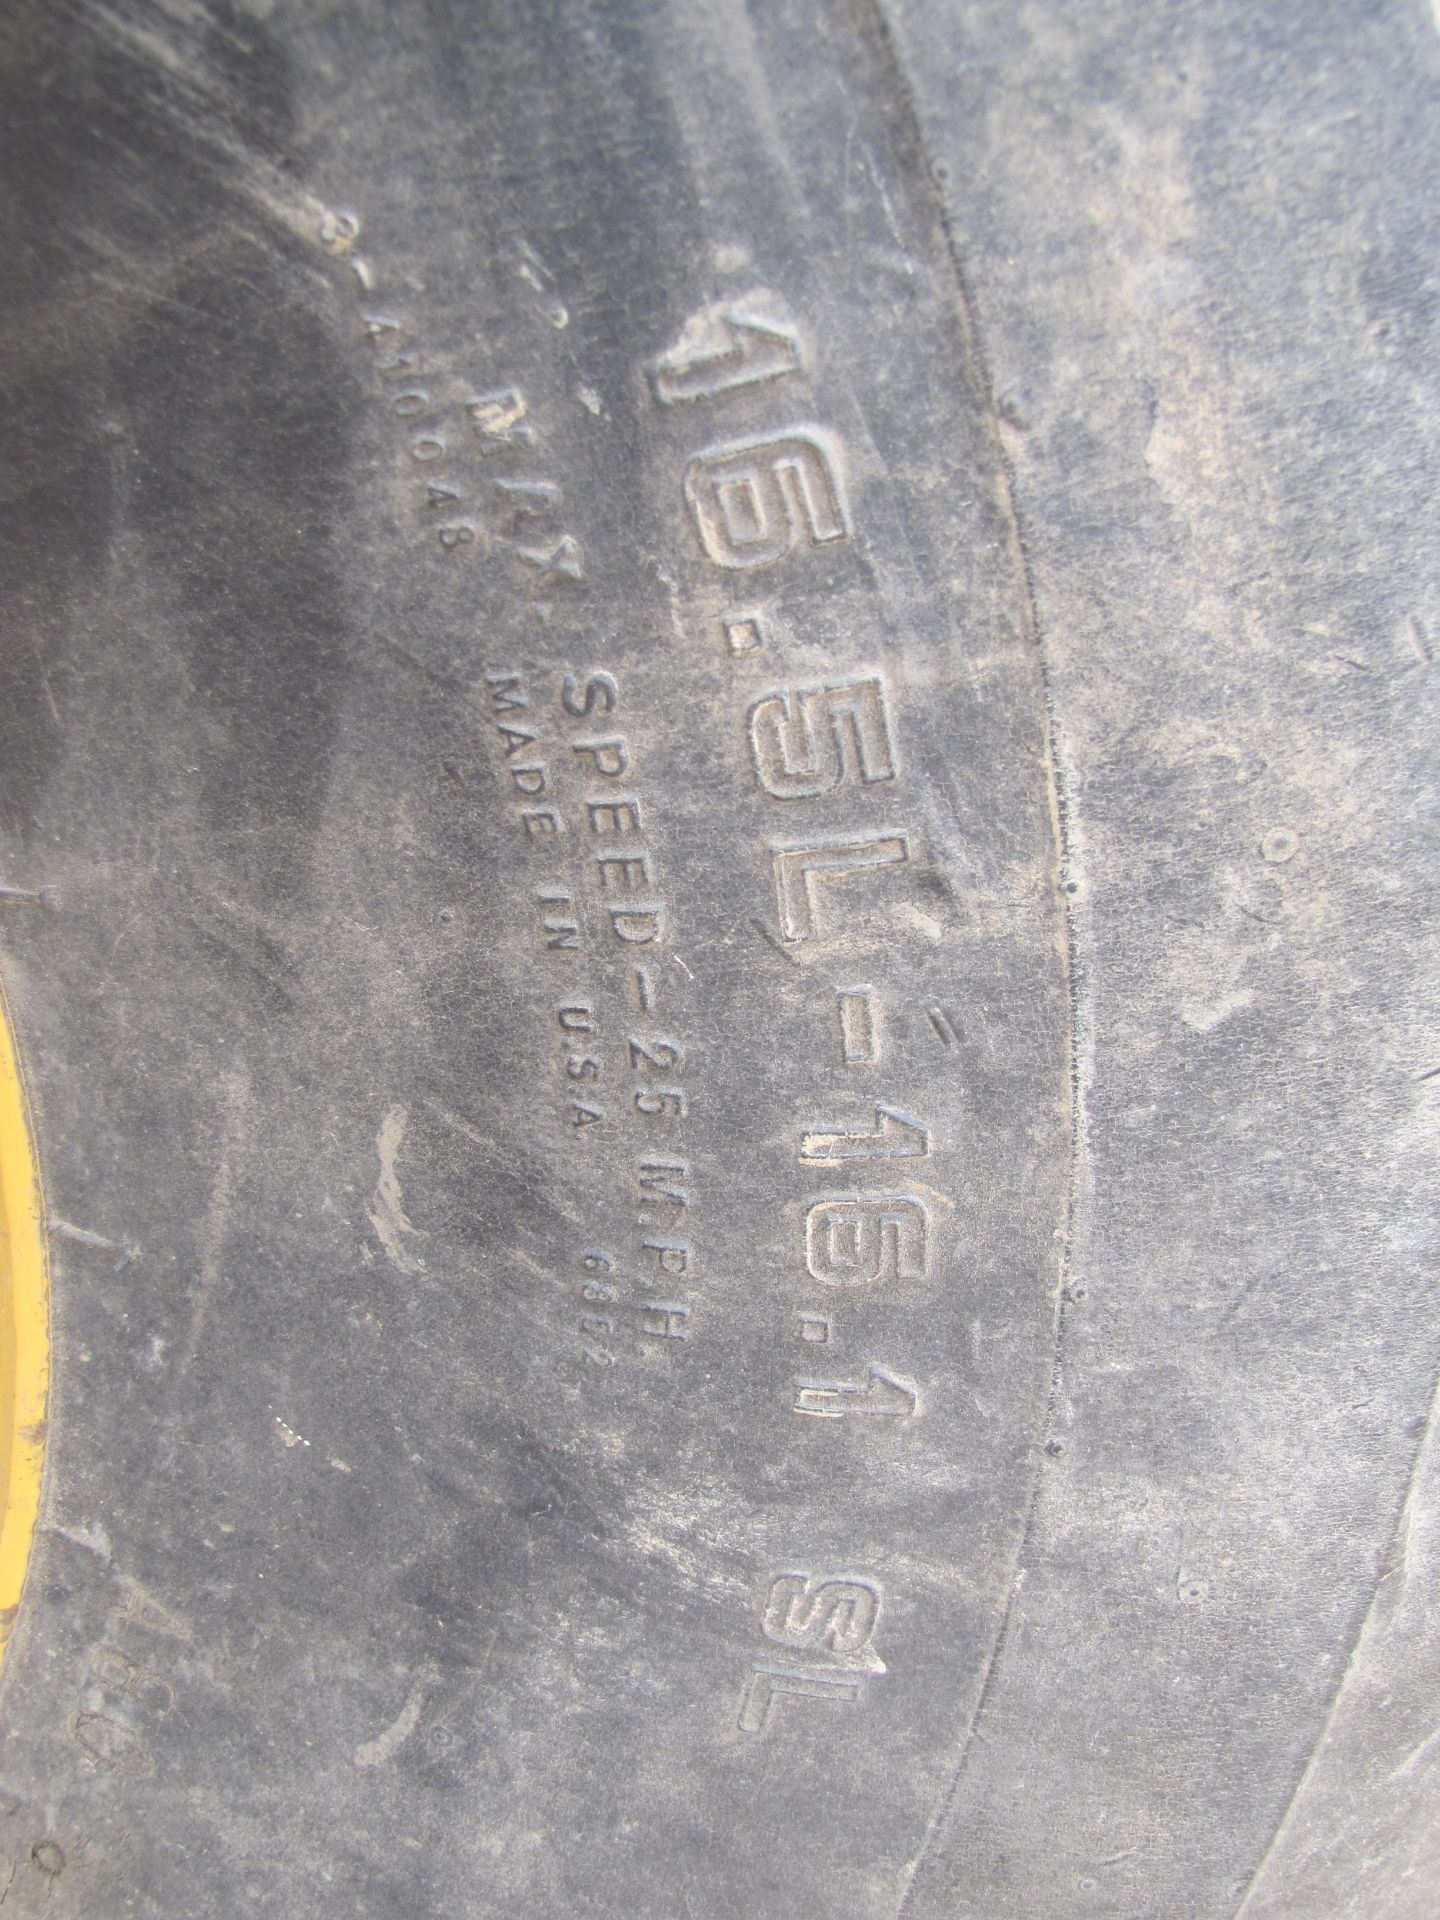 16.5L-16.1 Tire - Image 5 of 6